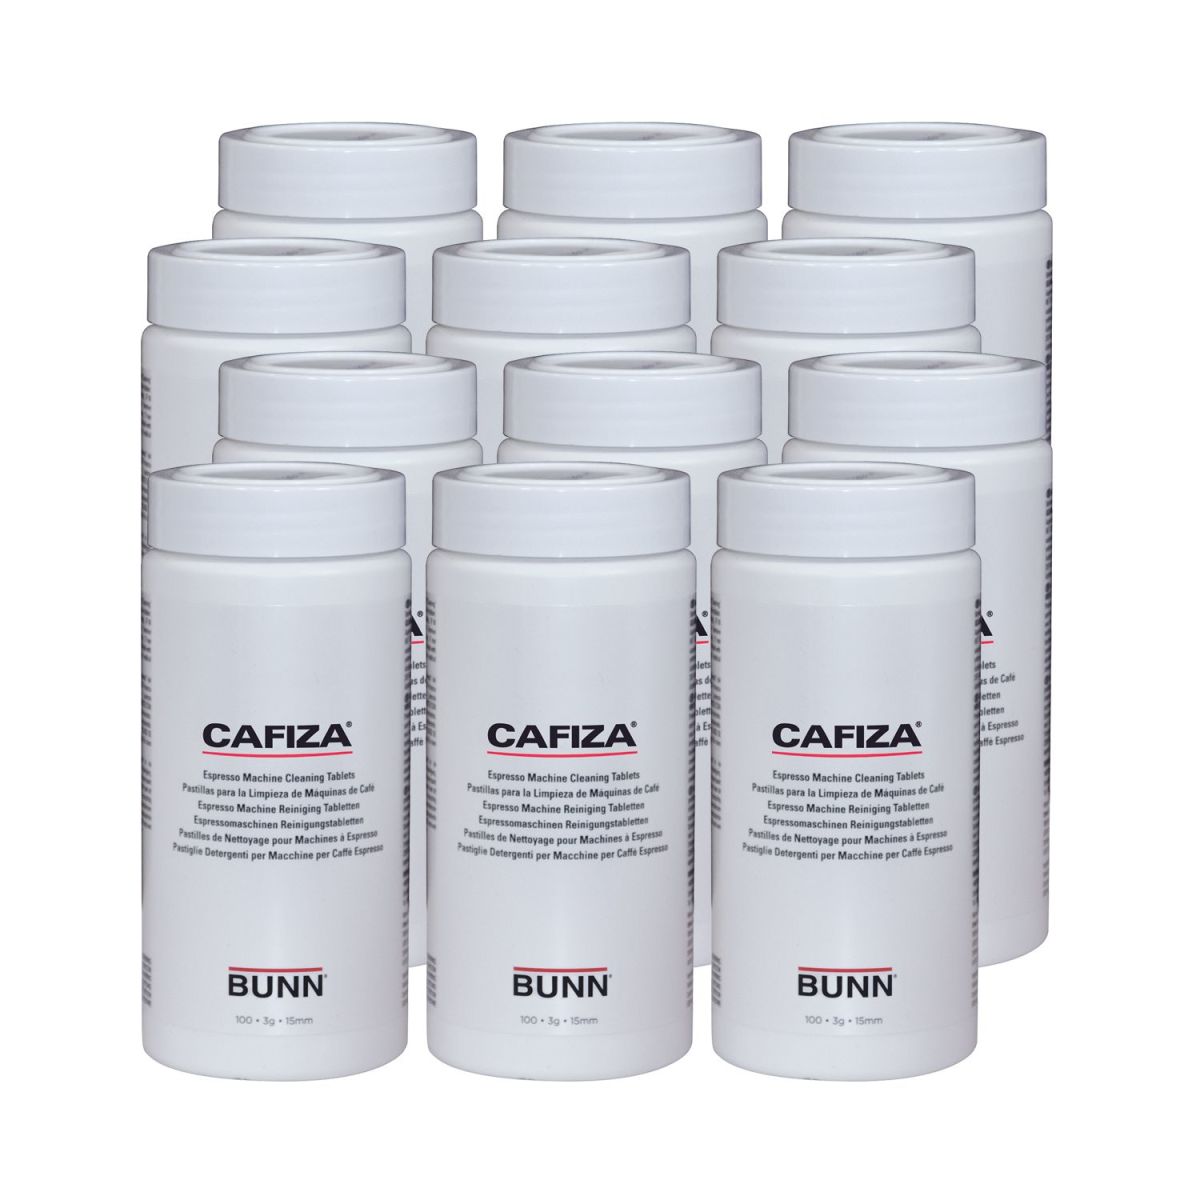 BUNN - Cleaning Tablets, Cafiza Case of 12